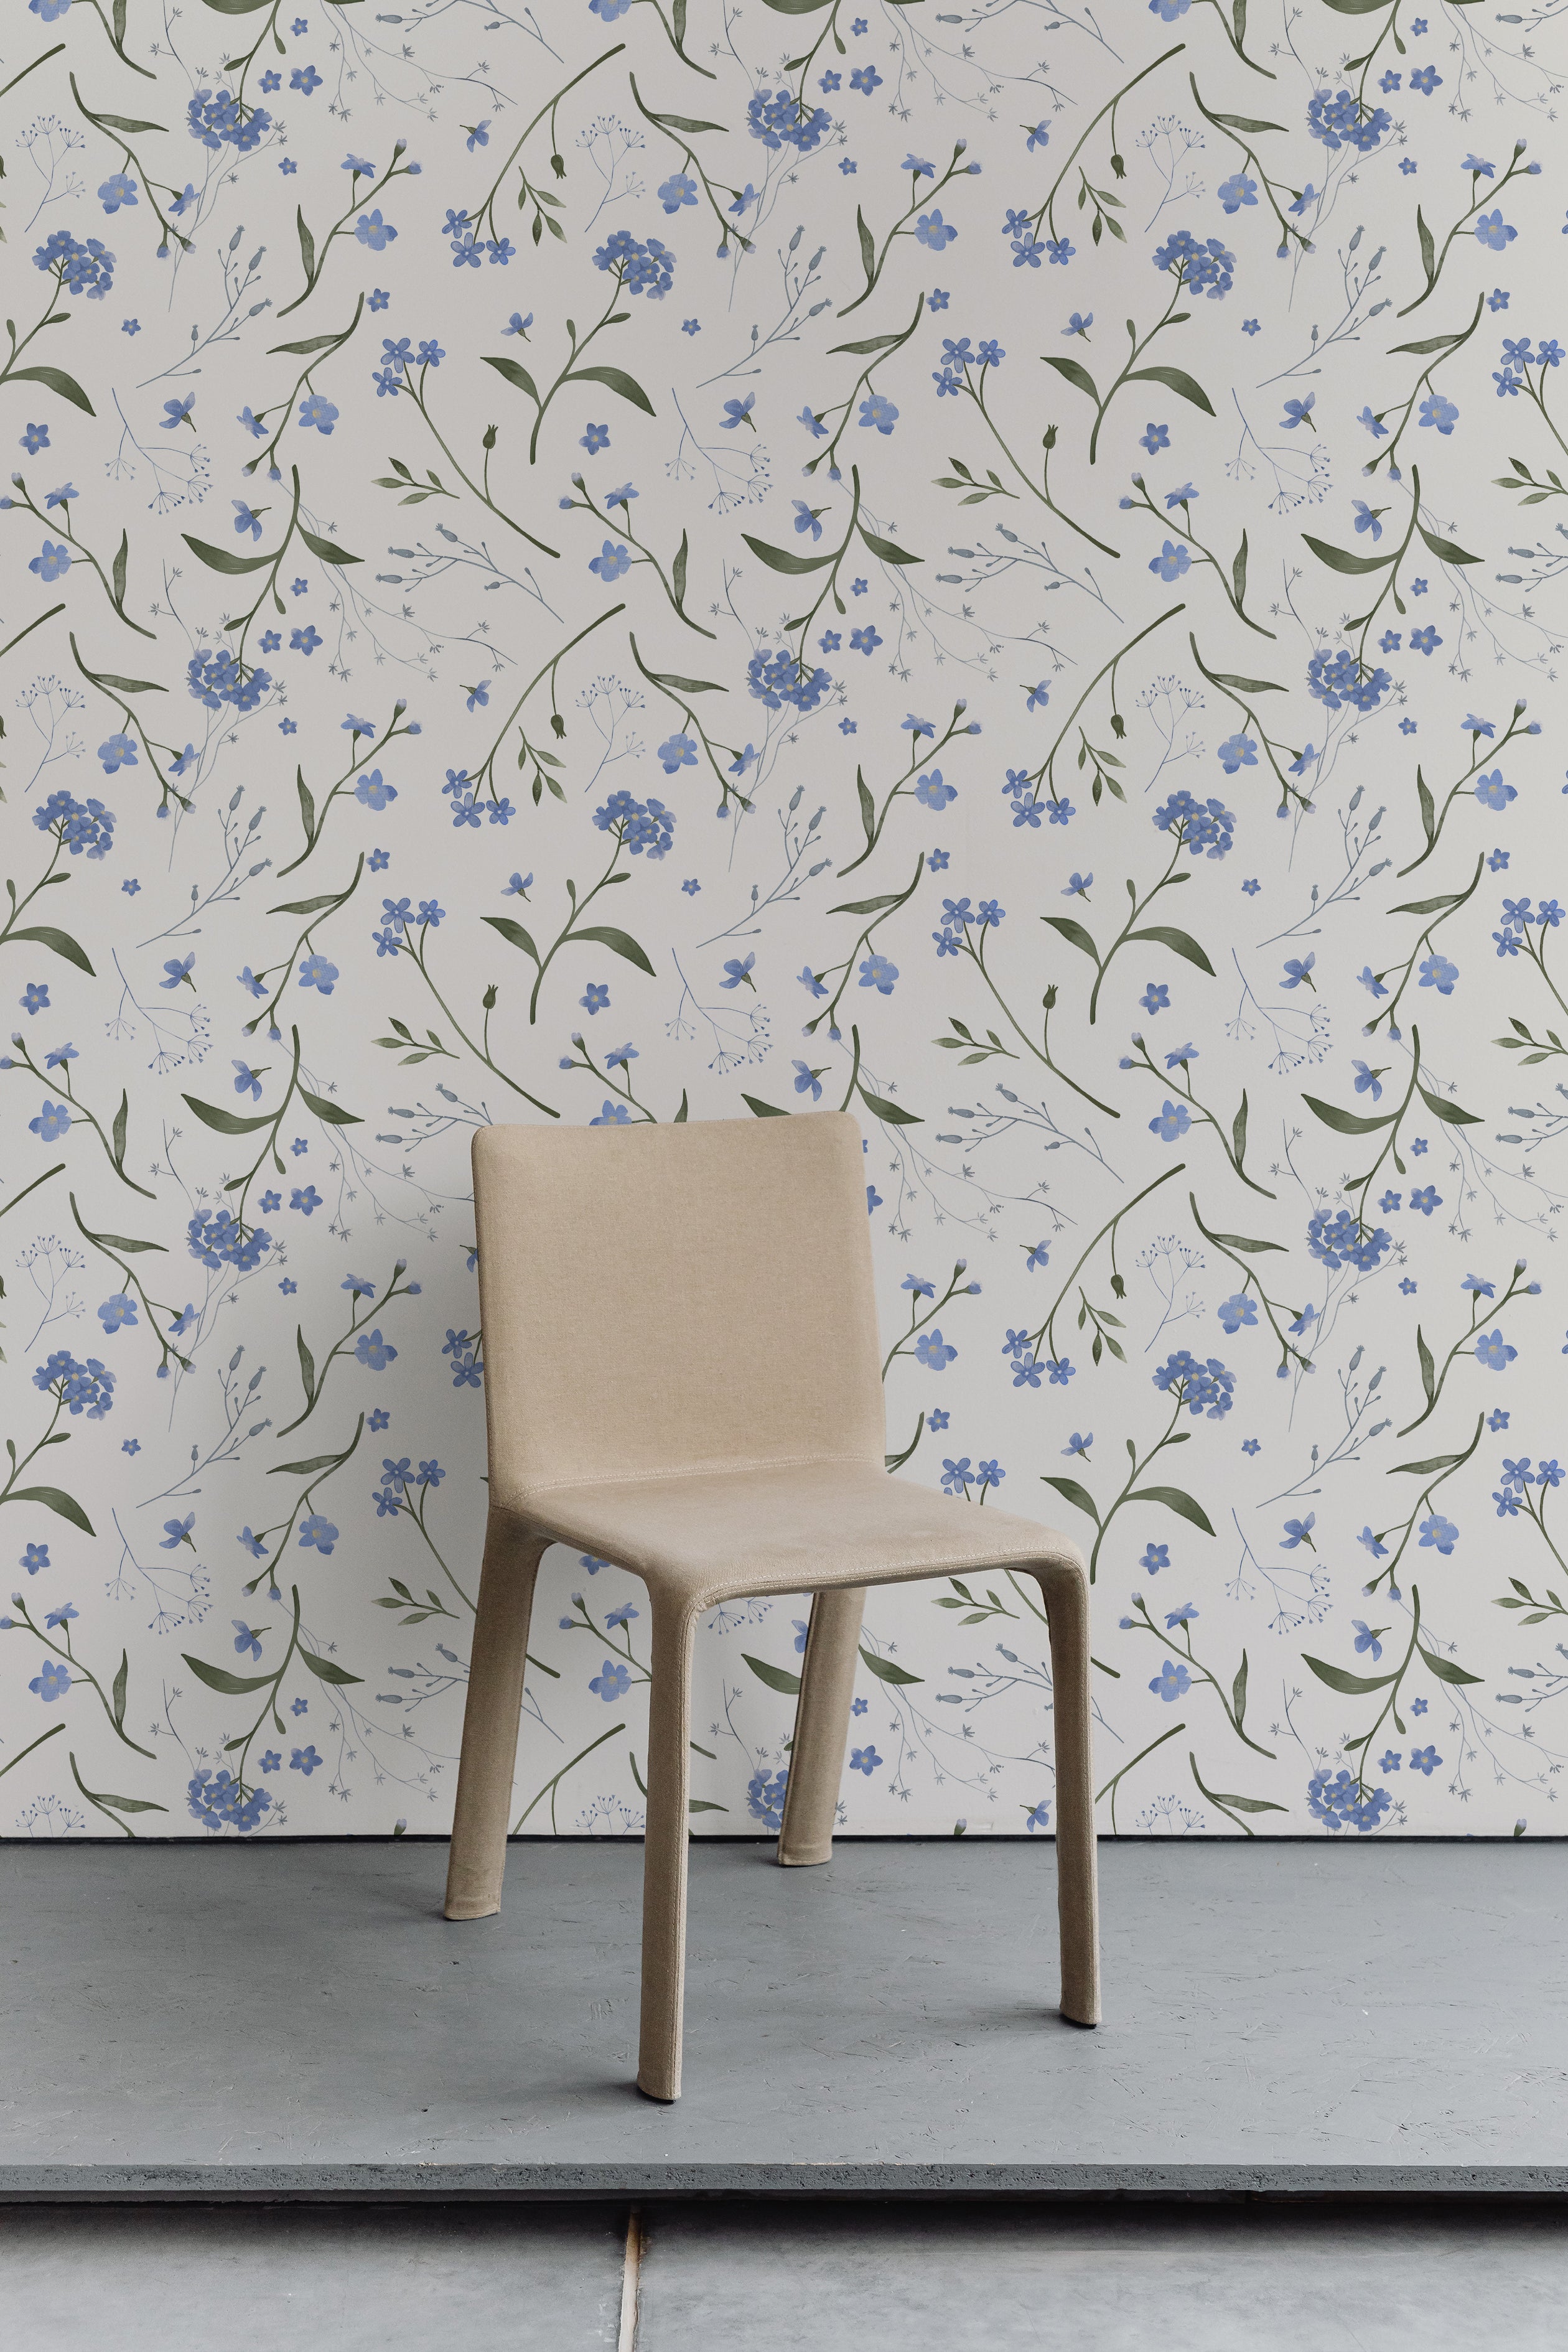 A simple modern chair stands against a wall adorned with Wildflower Bouquet Kids Wallpaper, featuring a delightful pattern of blue wildflowers and green foliage on a white background. The scene conveys a serene and natural setting, perfect for a peaceful interior.